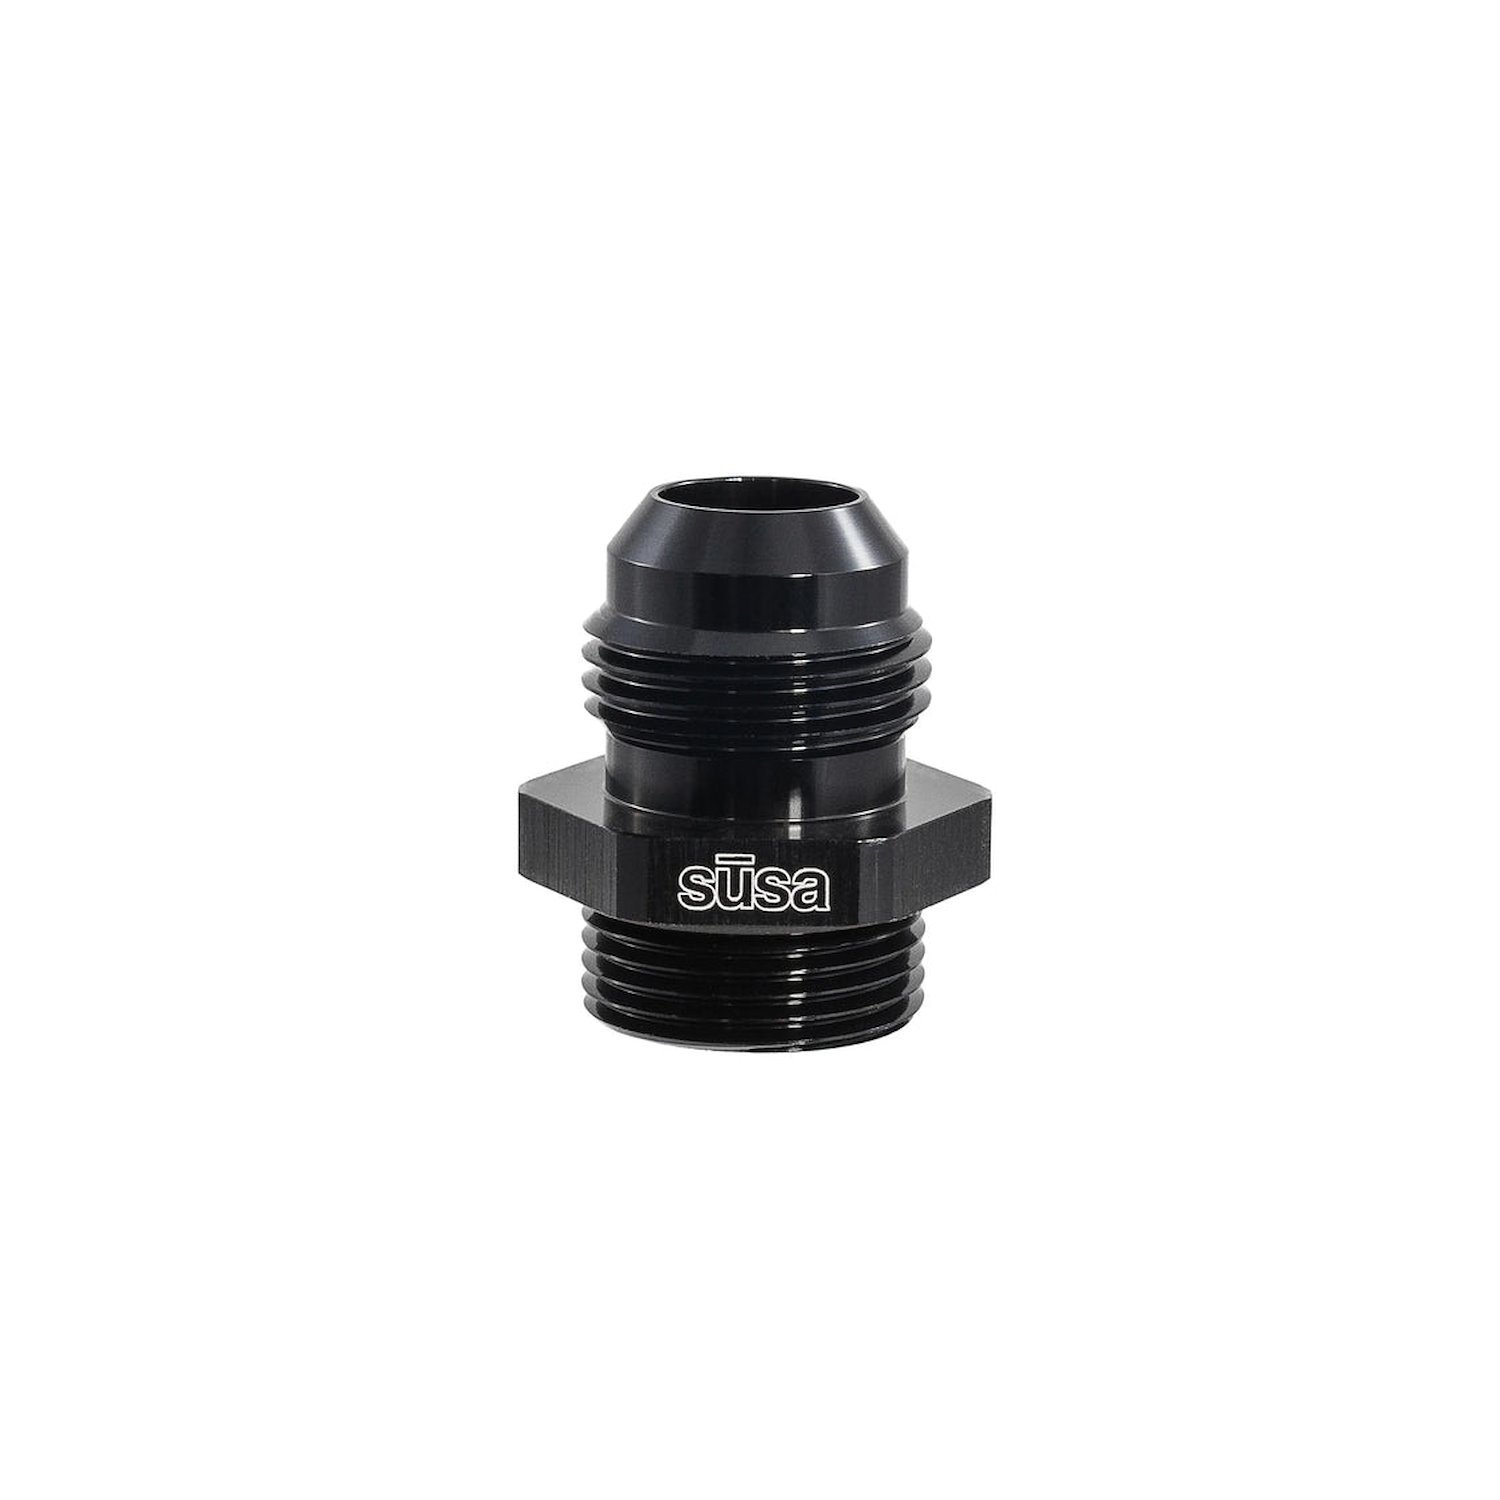 22-M22AN10-SE ProLine Adapter Fitting, 22 mm x 1.5 Male to AN10 Male, Straight